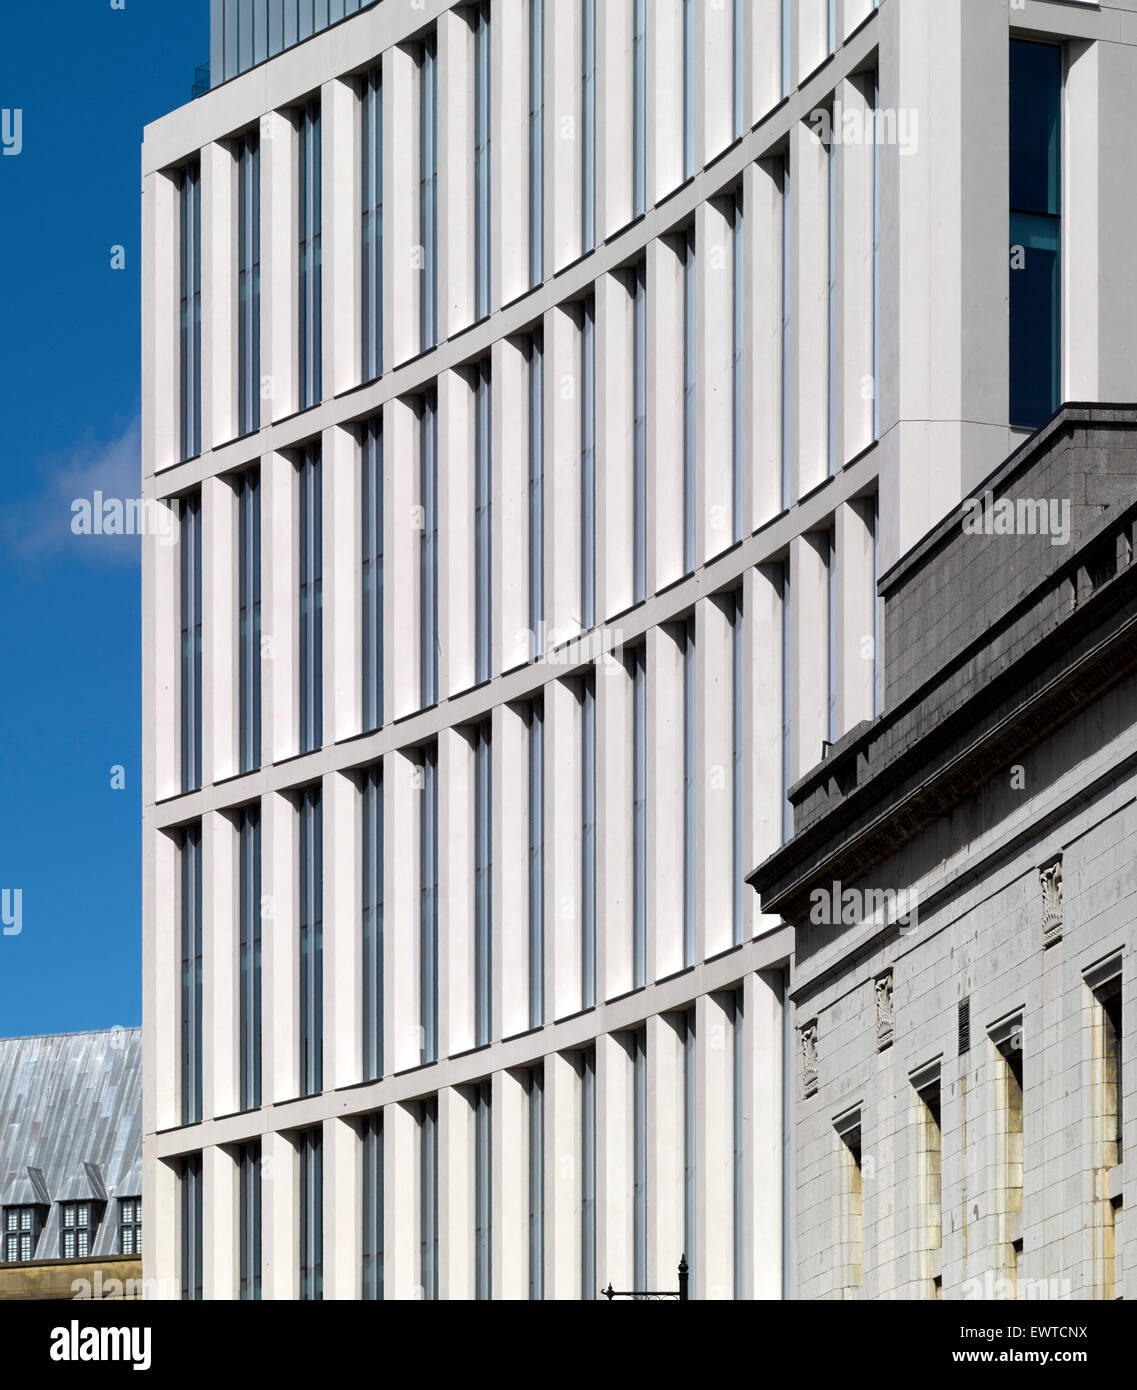 Facade detail. One St Peter's Square, Manchester, United Kingdom. Architect: Glenn Howells Architects, 2015. Stock Photo